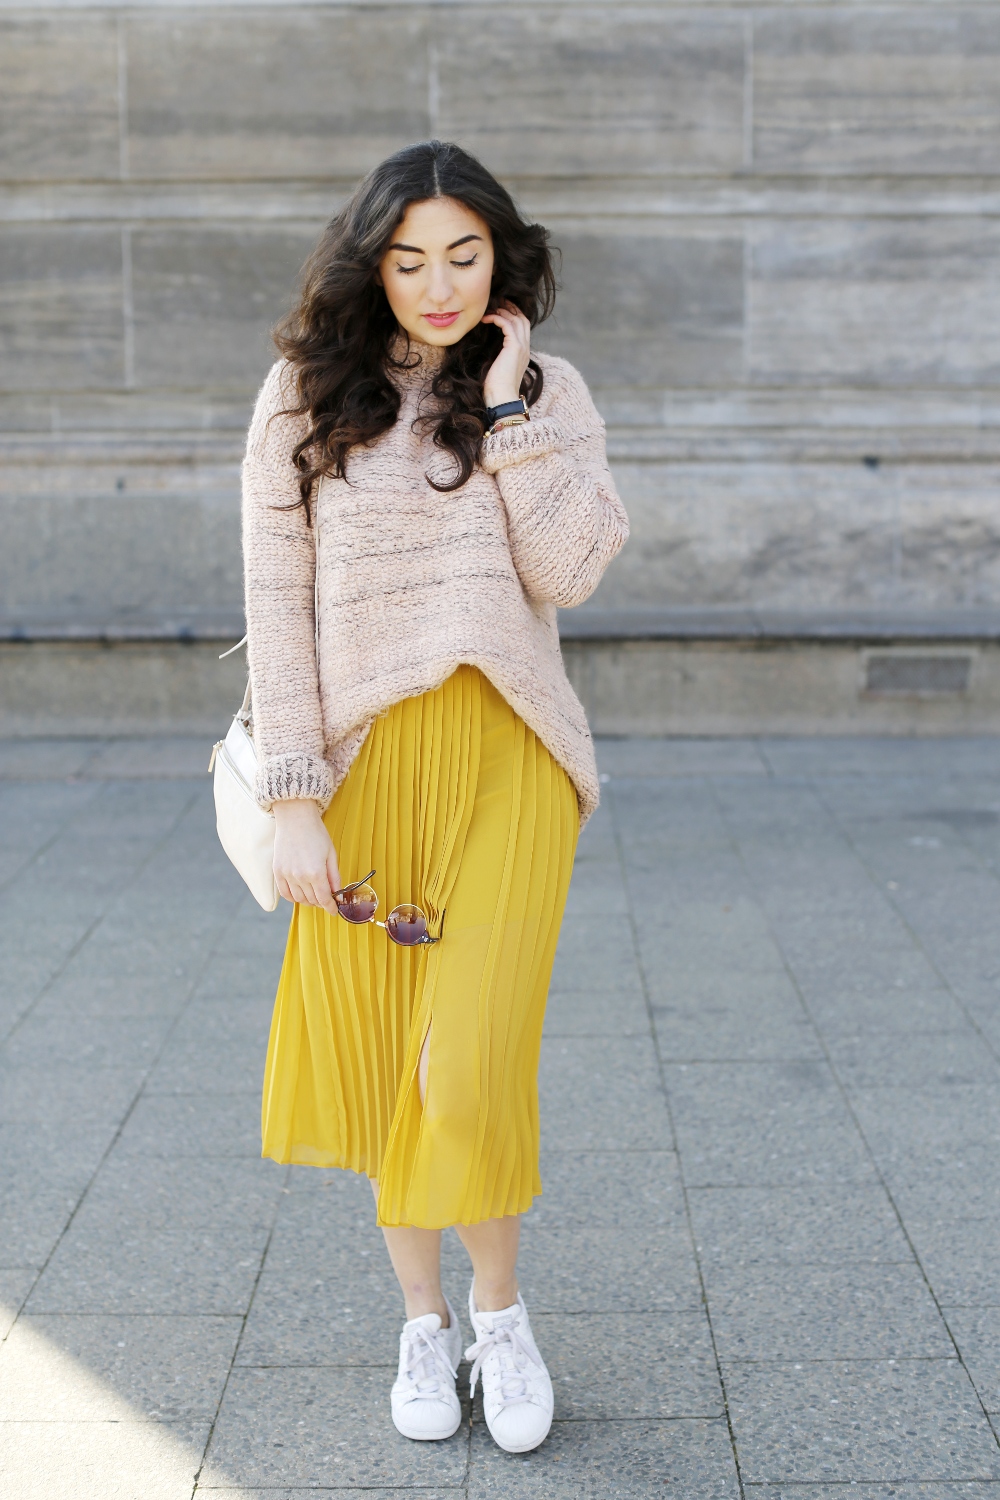 Spring look with soft candy colours including a Yellow Silk Skirt from Stefanel, a chunky blush sweater from mango and adidas superstars sneakers.